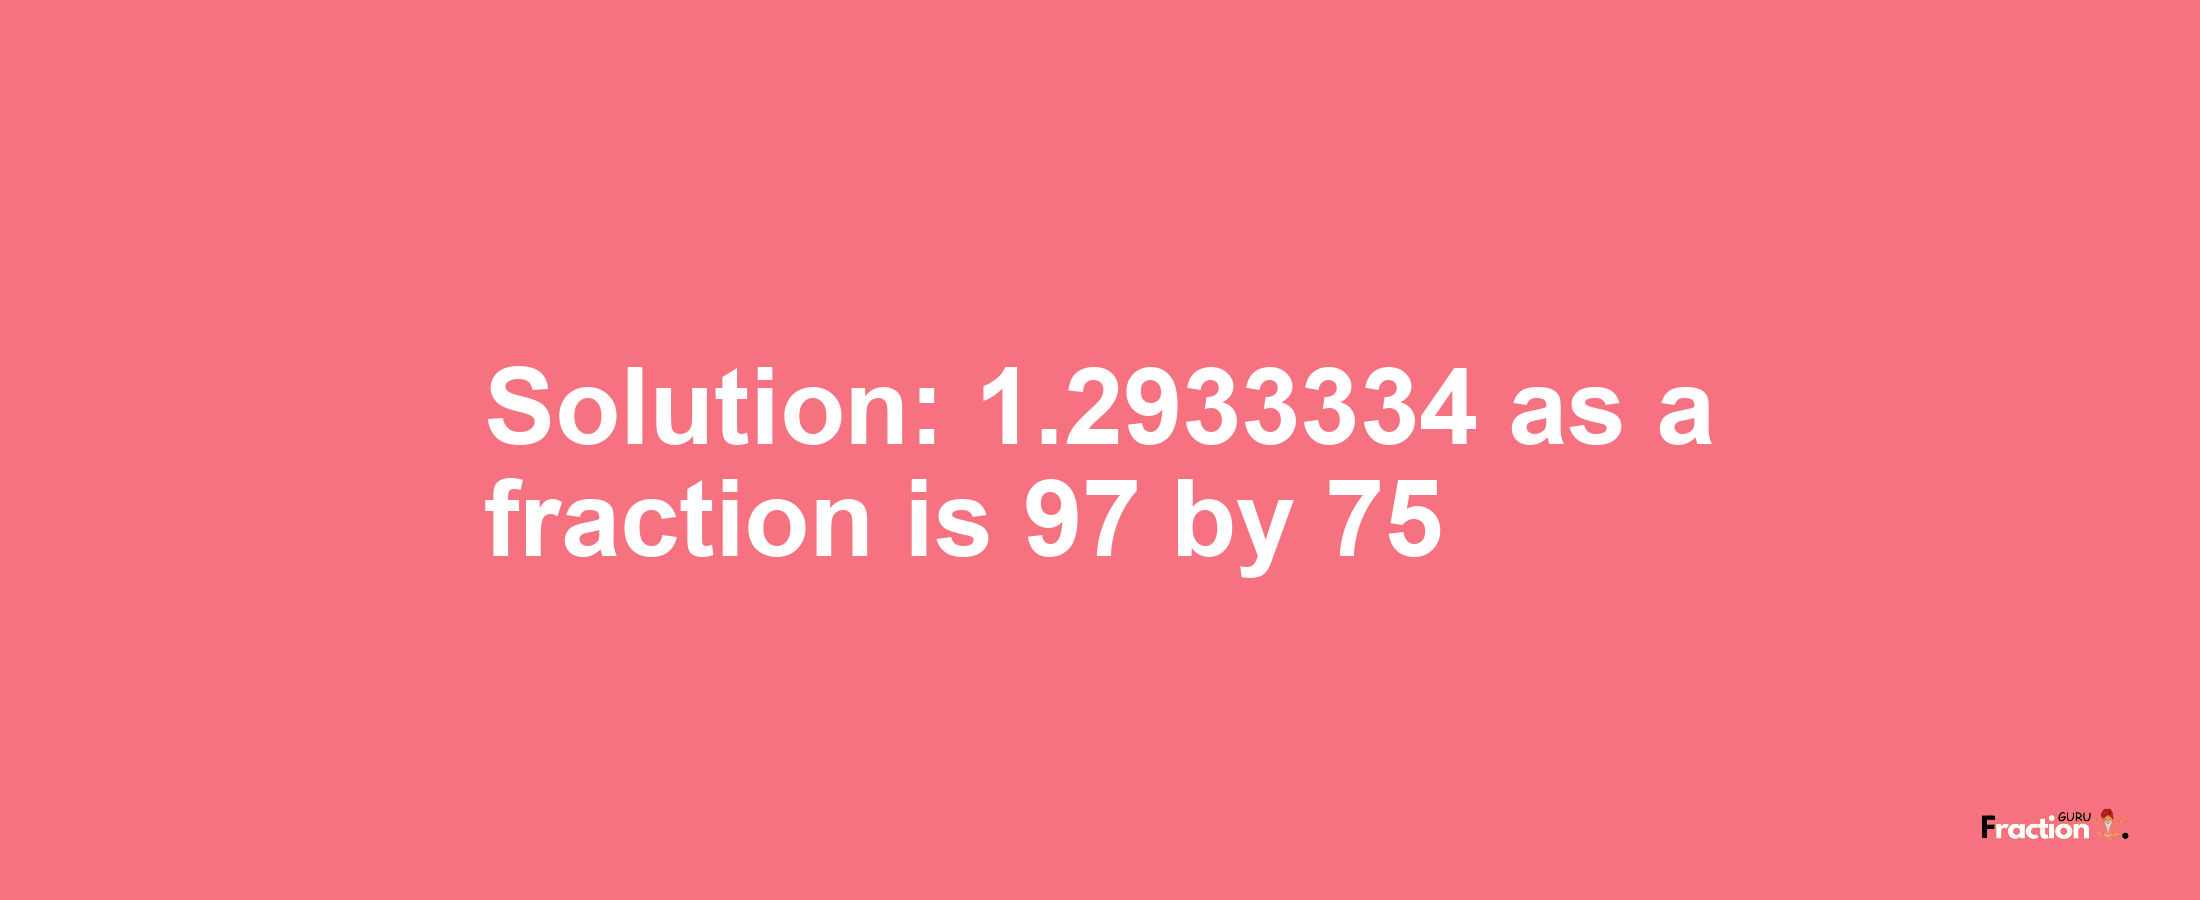 Solution:1.2933334 as a fraction is 97/75